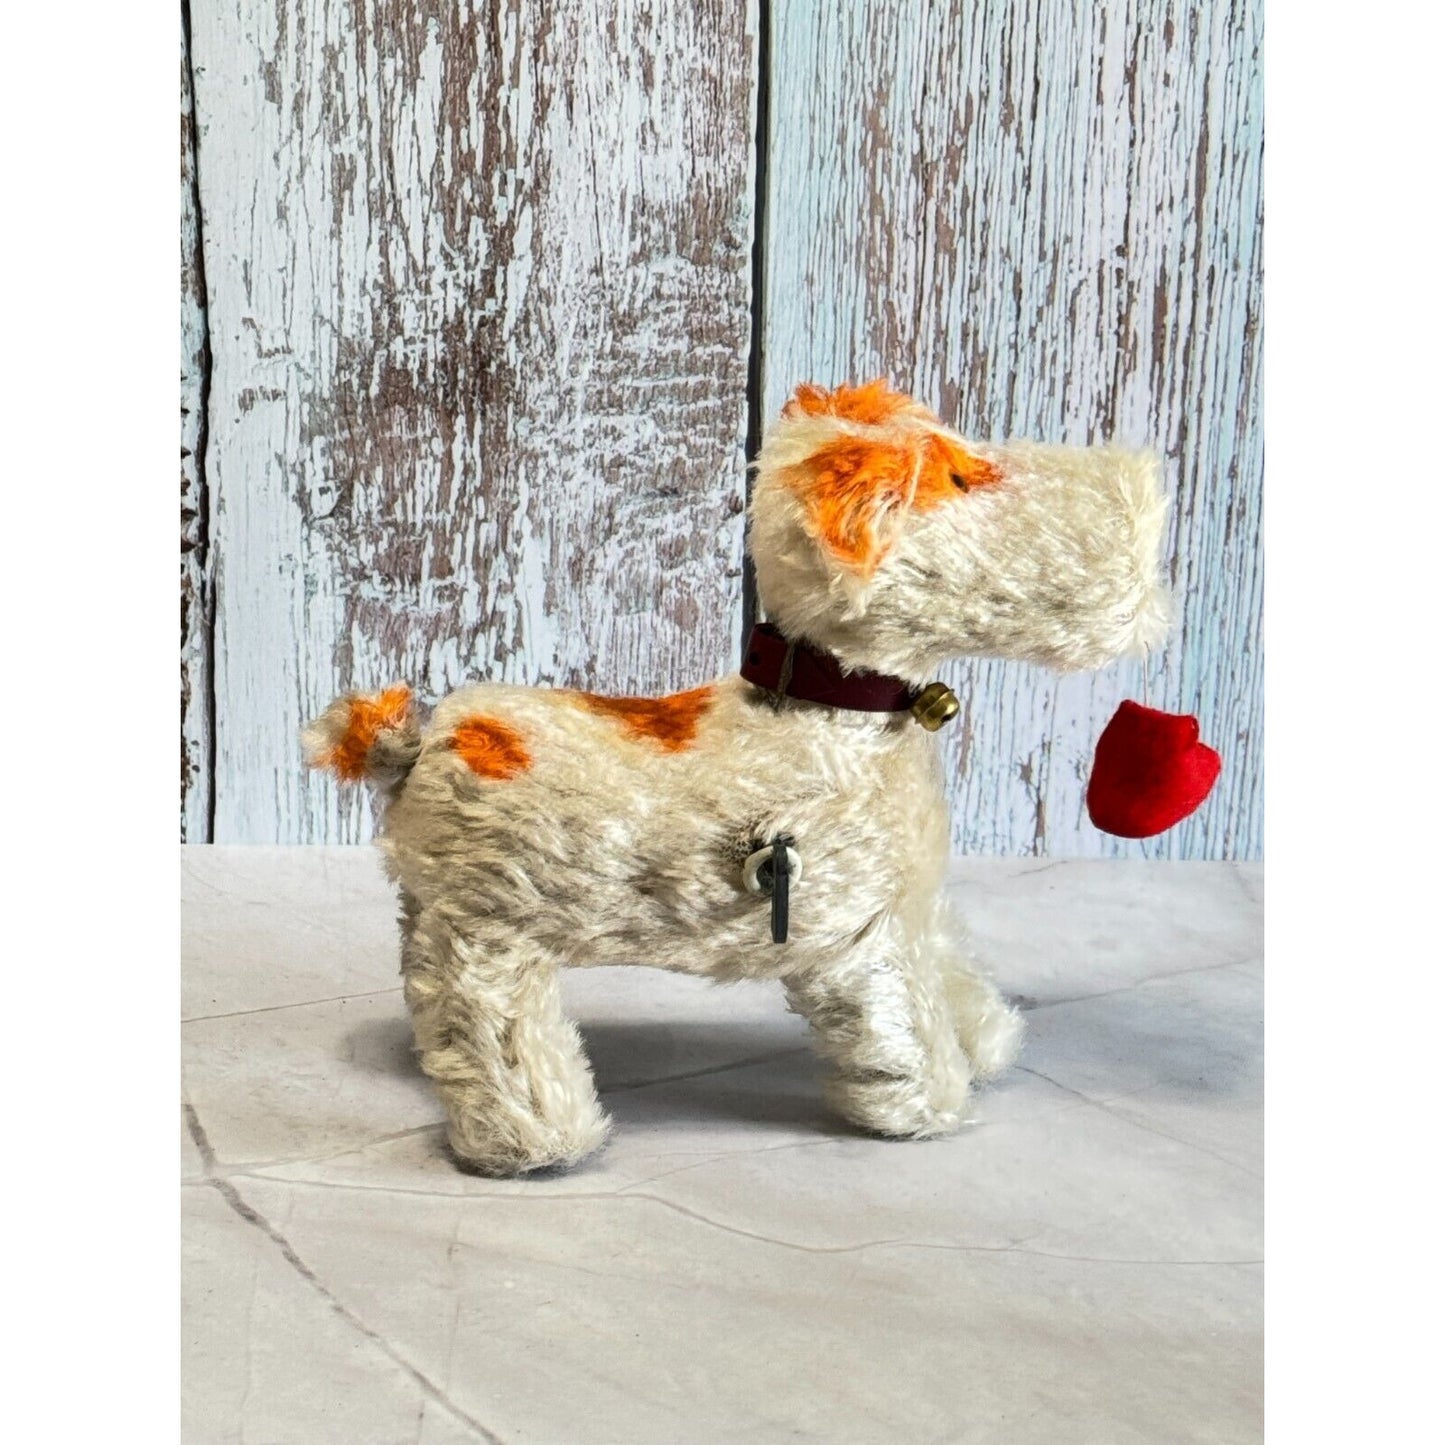 Old Vintage Orig Alps Wind Up Terrier Playful Pup Walks and Wags C1950's Japan